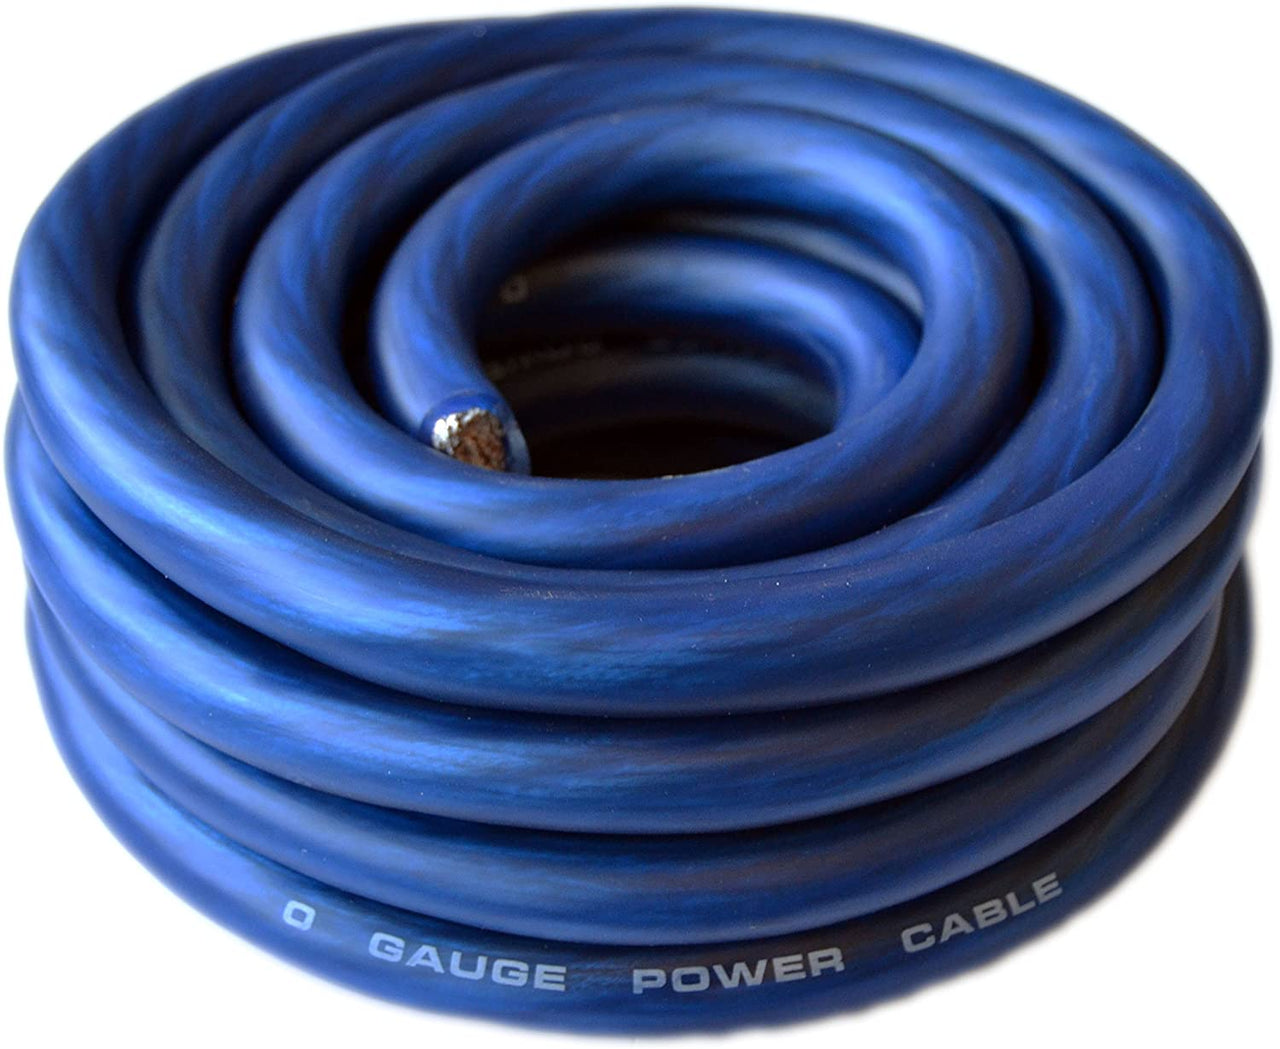 Absolute PW0G25BL 0 Gauge Blue Amplifier Amp Power/Ground 1/0 Wire 25 Feet Superflex Cable